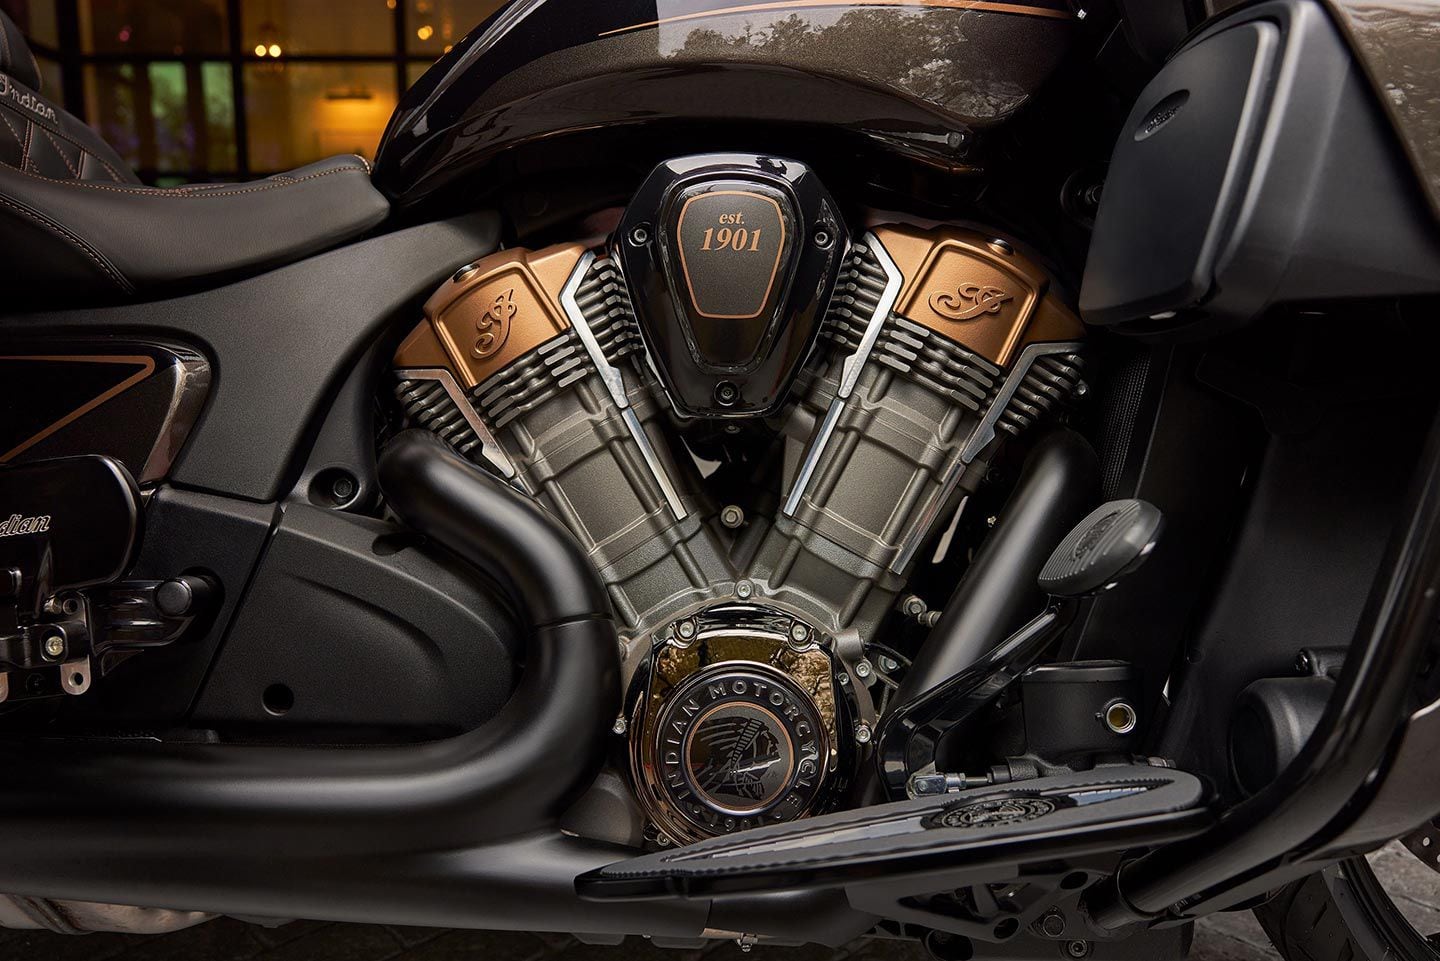 A bronze-accented 1,768cc liquid-cooled PowerPlus engine takes center stage on the newest Elite model.